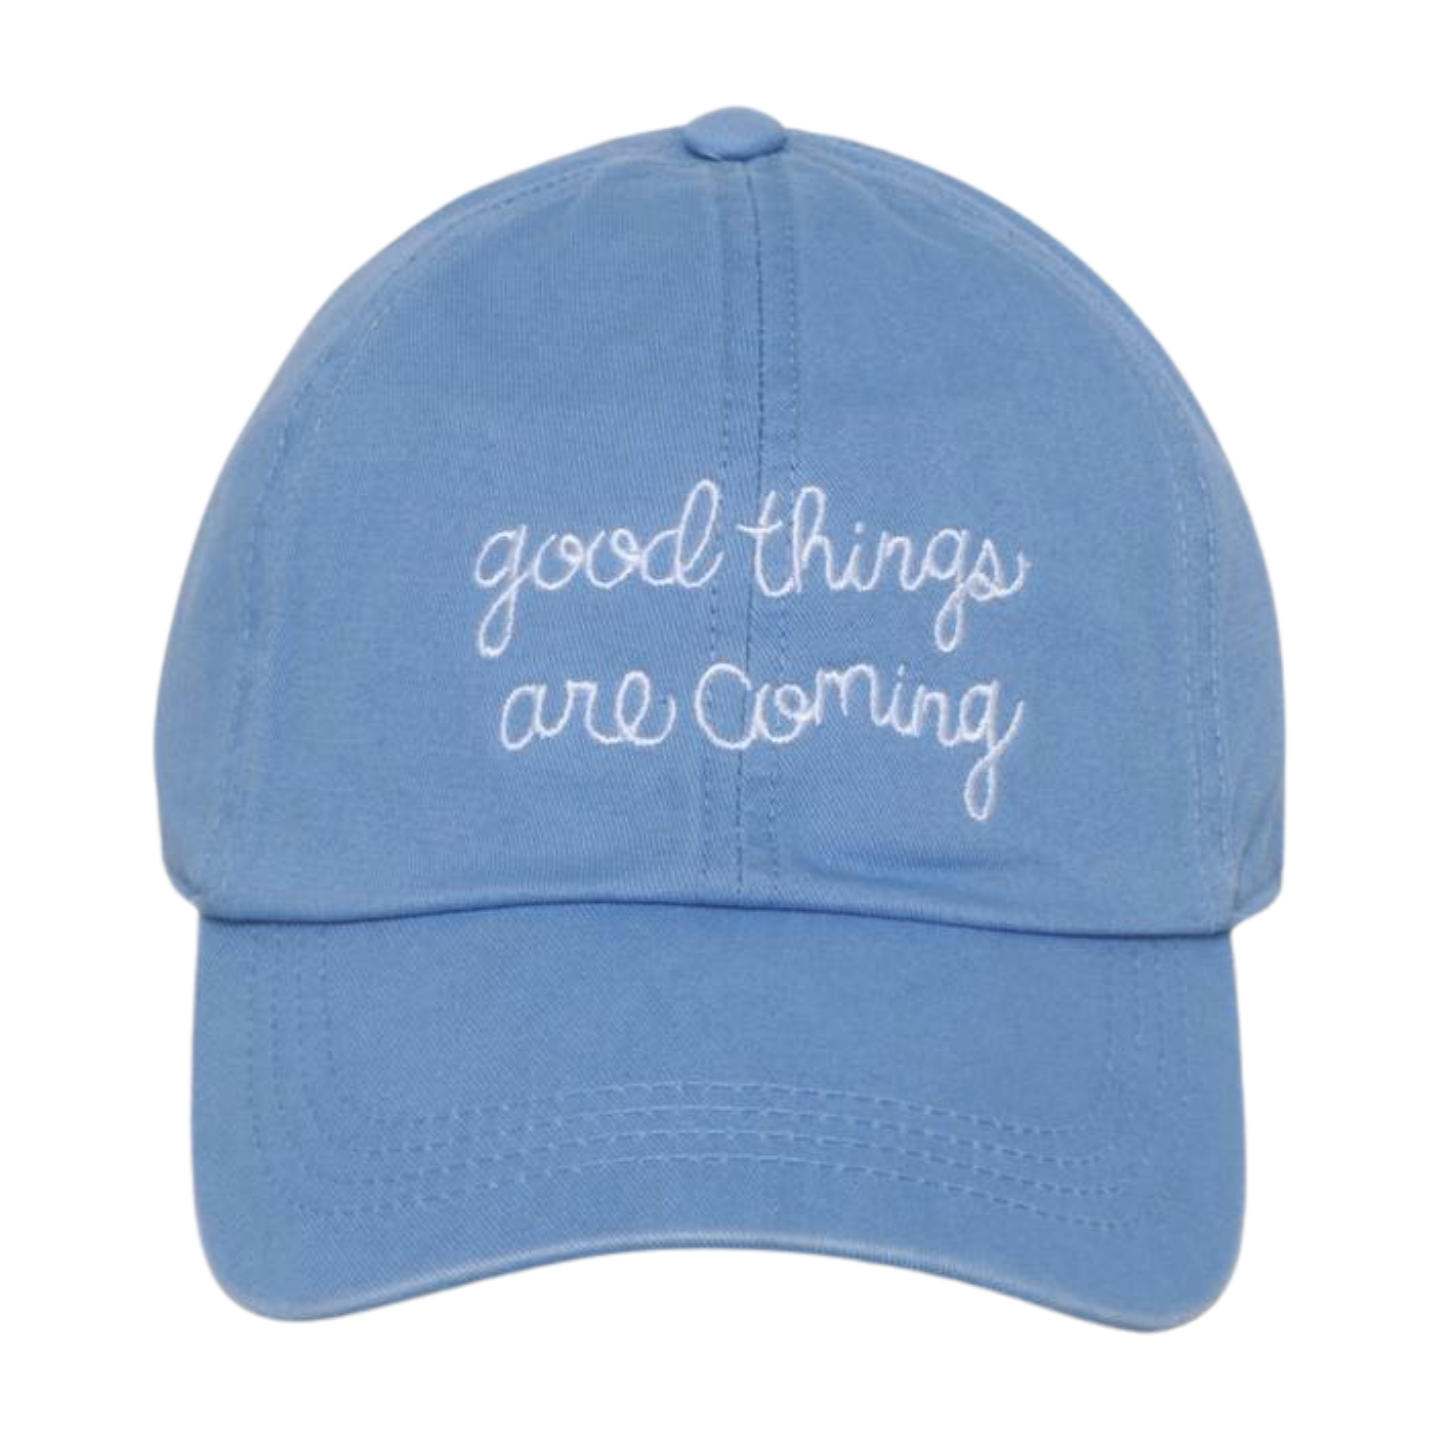 LCAP3473 - "GOOD THINGS ARE COMING" EMBROIDERED BASEBALL CAP